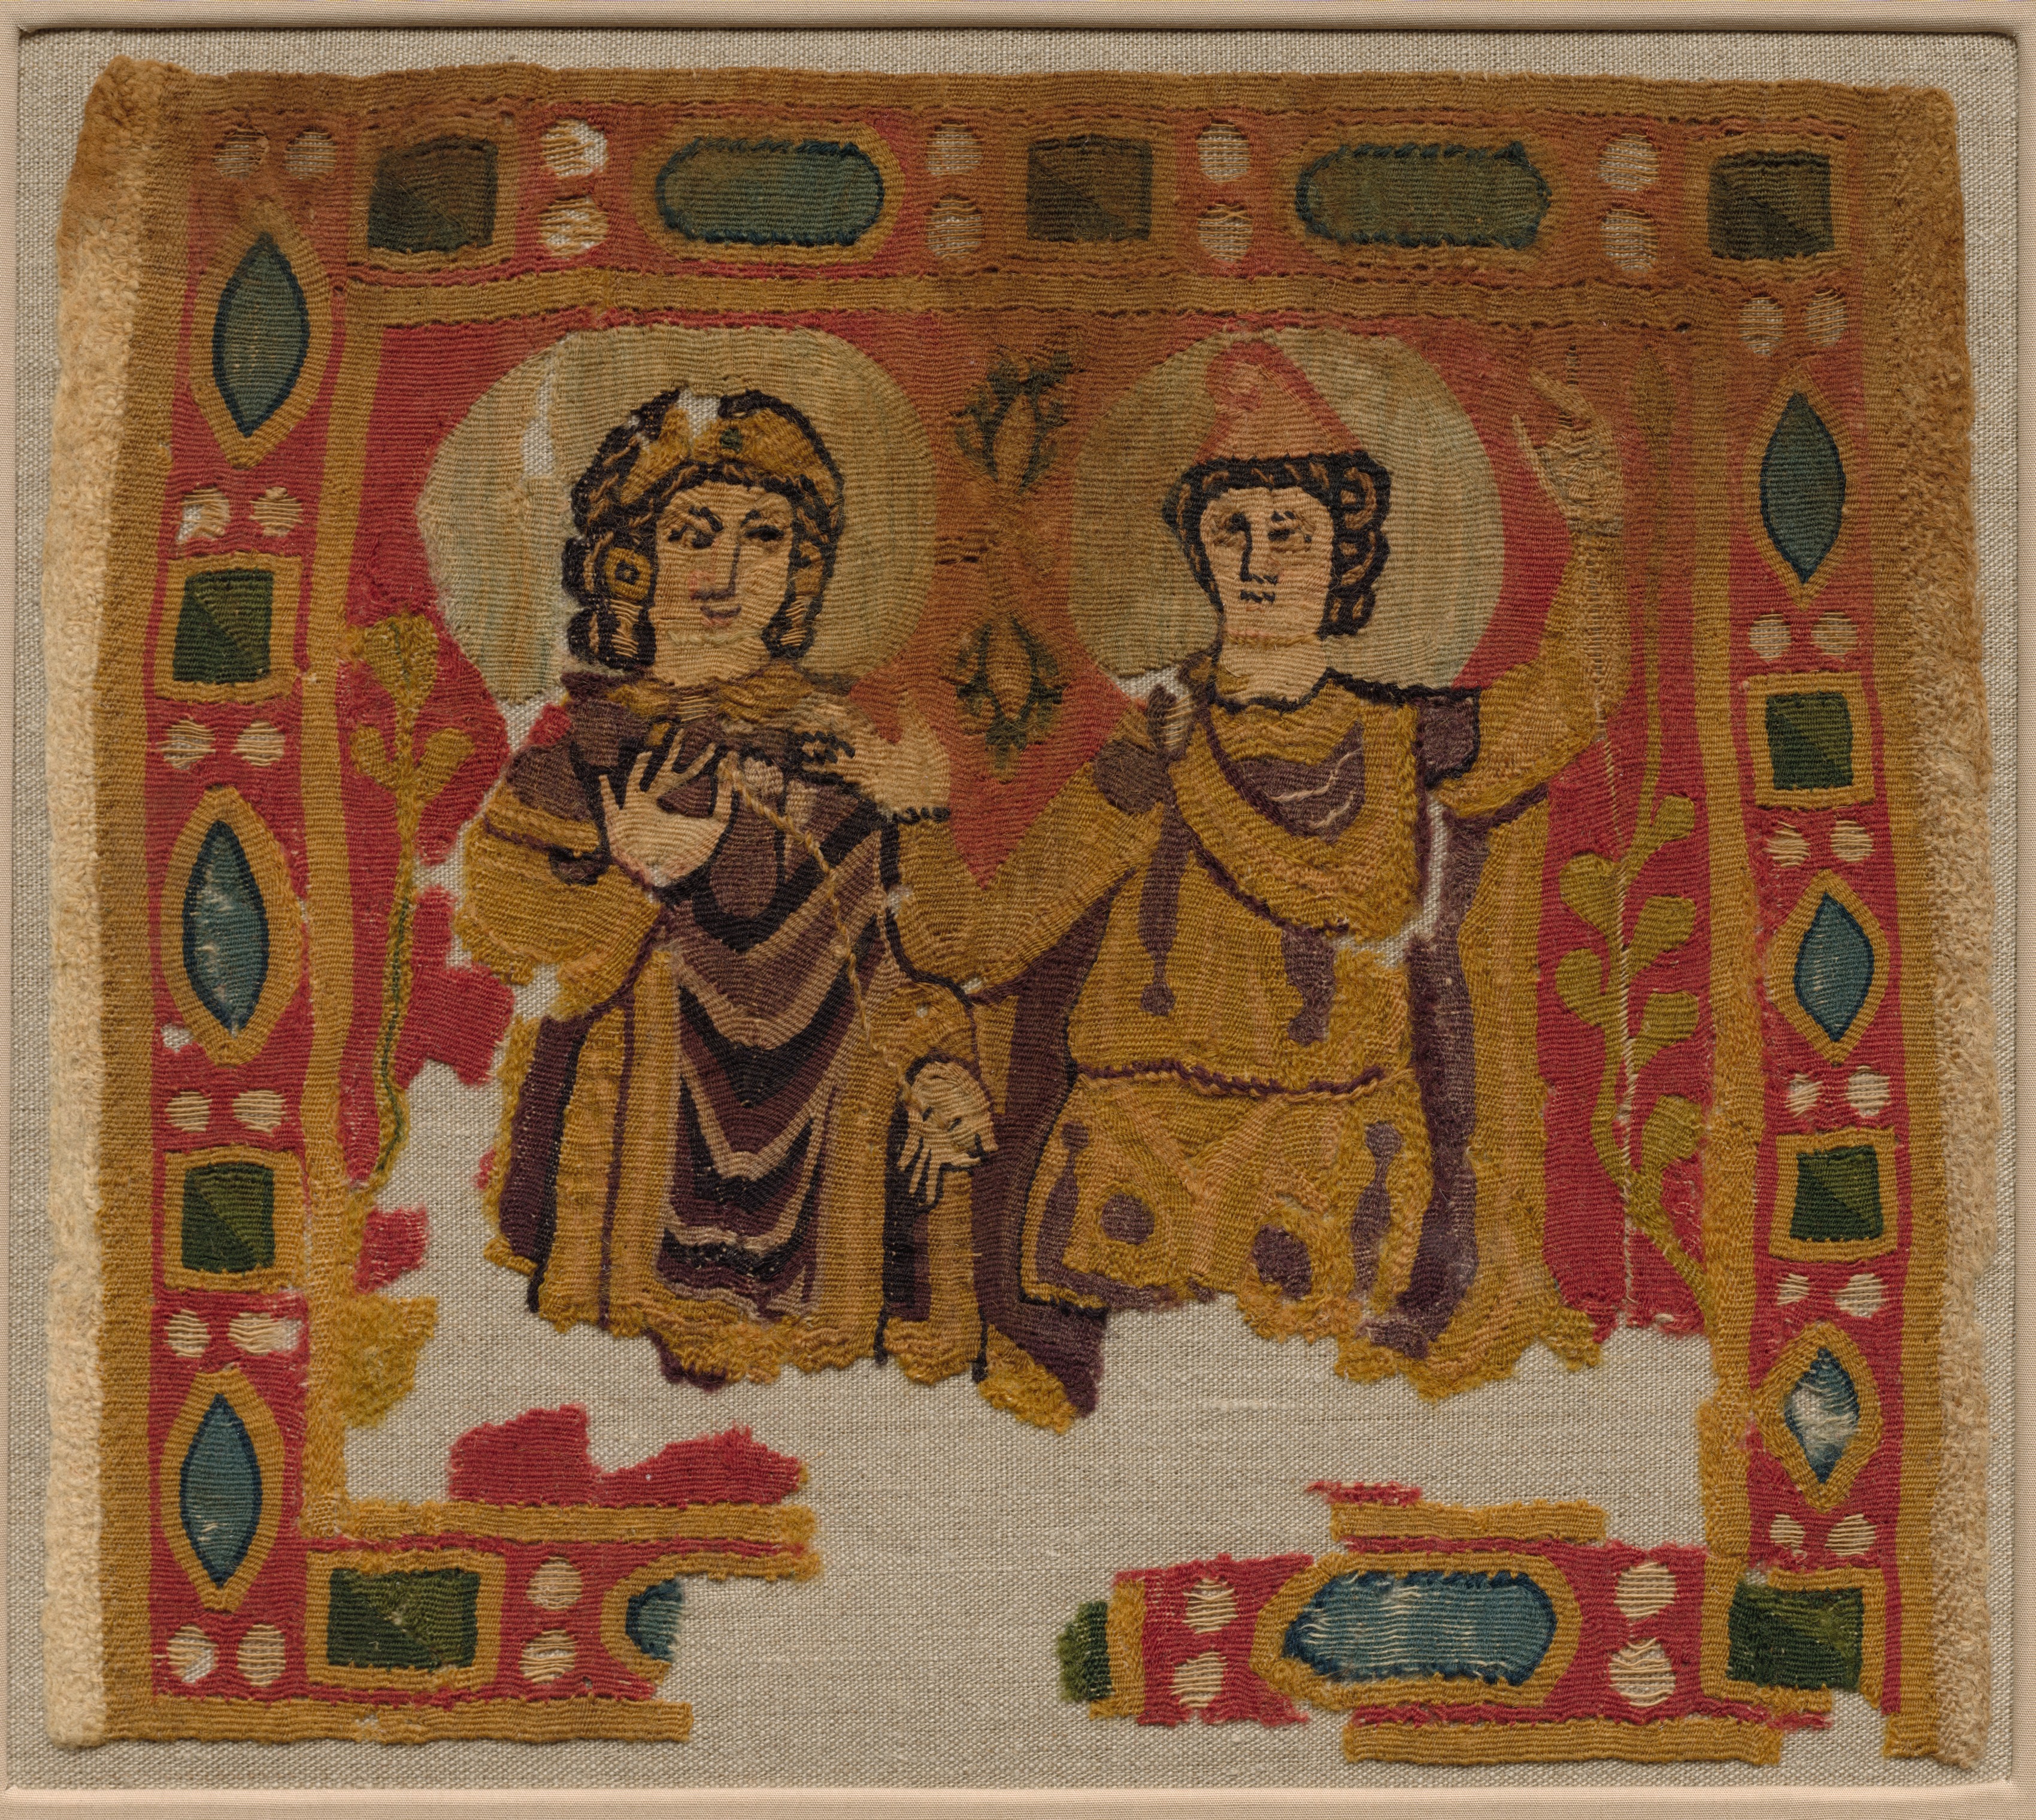 Two Figures Framed by a Jeweled Border